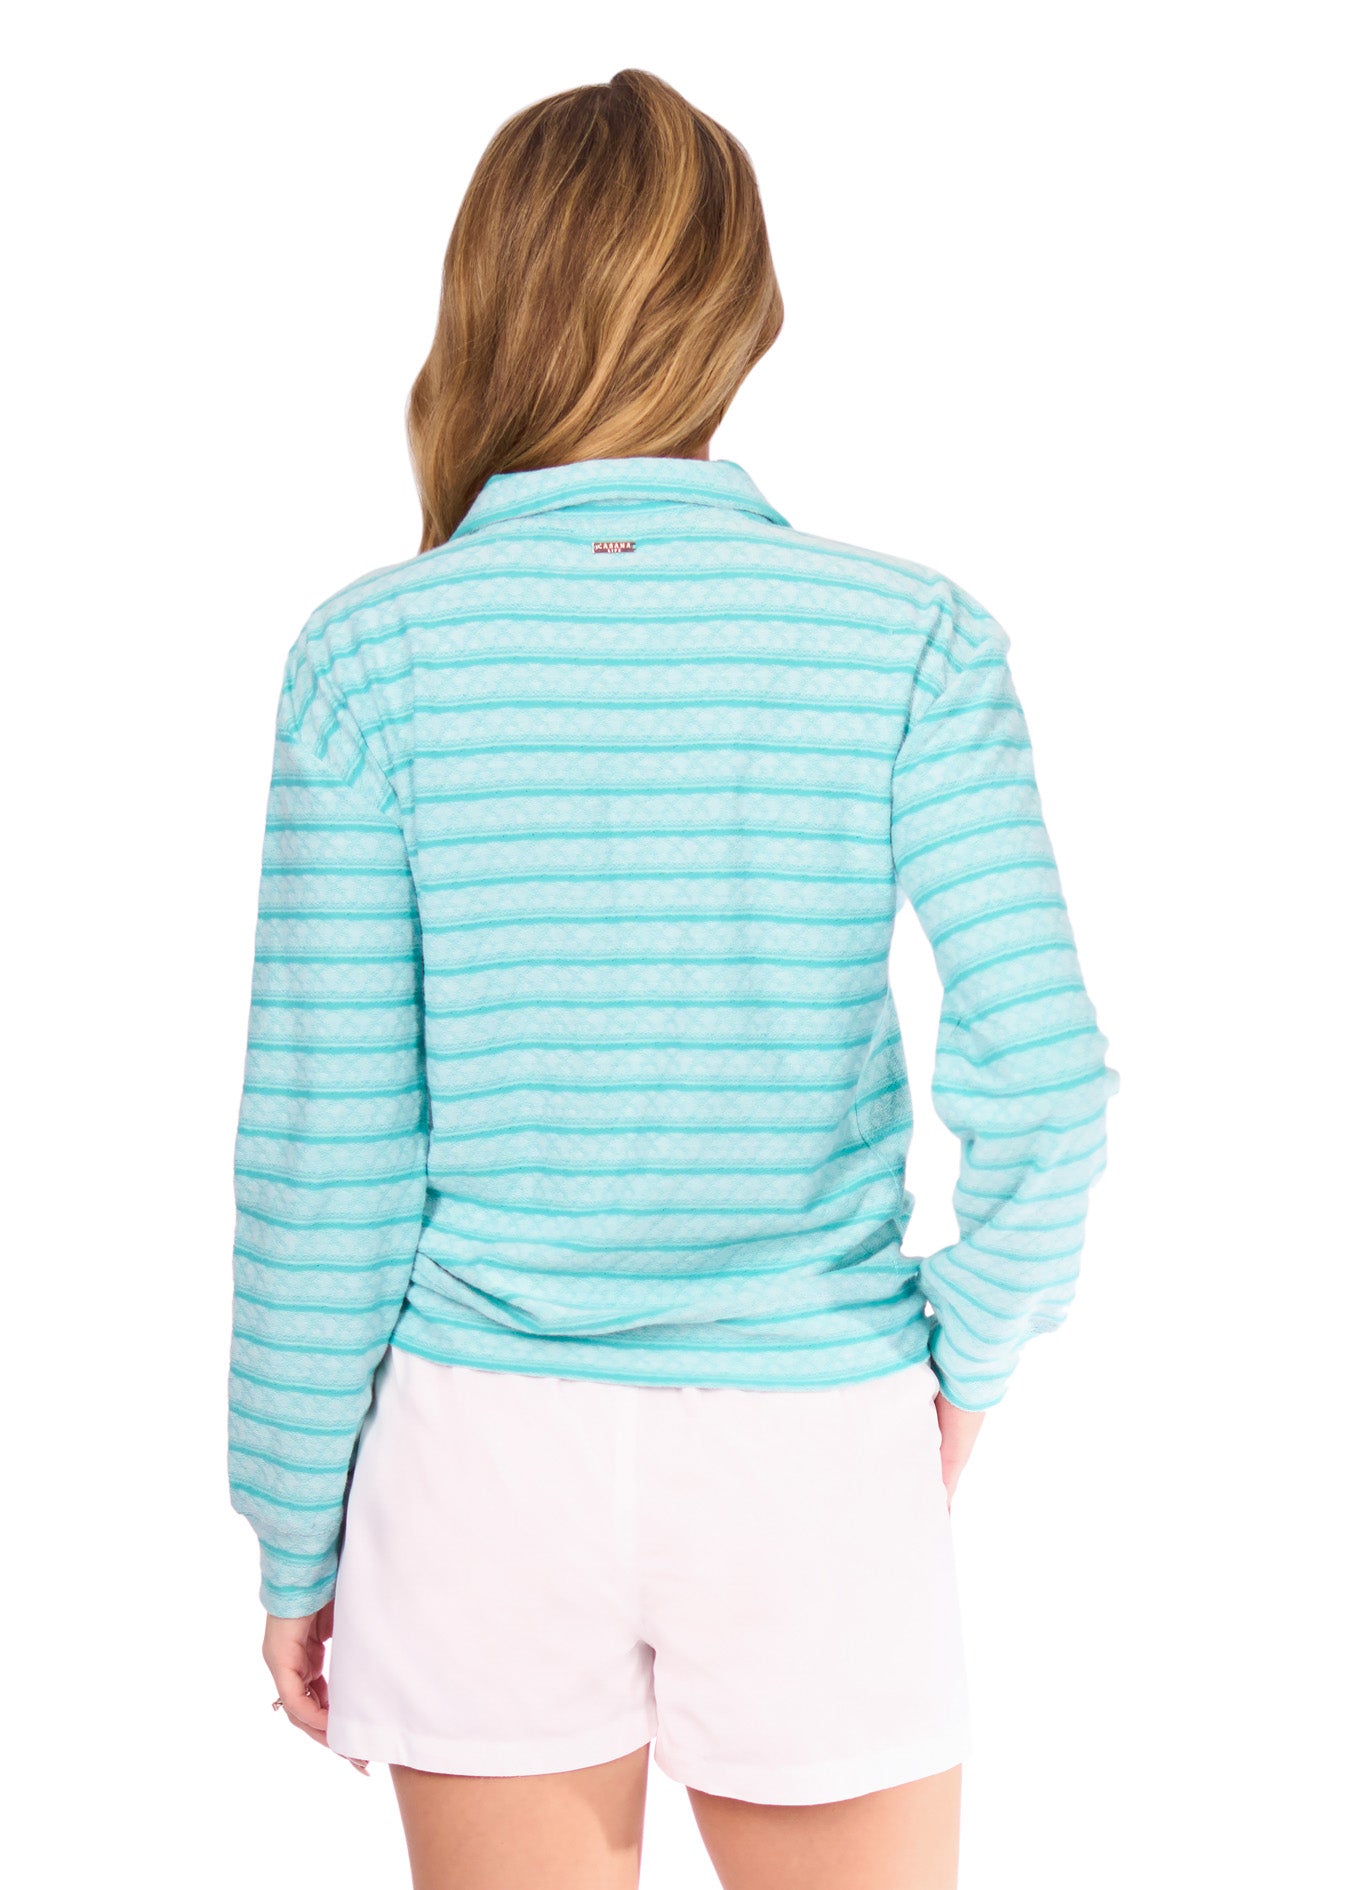 Back of woman in Aqua Half Zip Pullover and white shorts